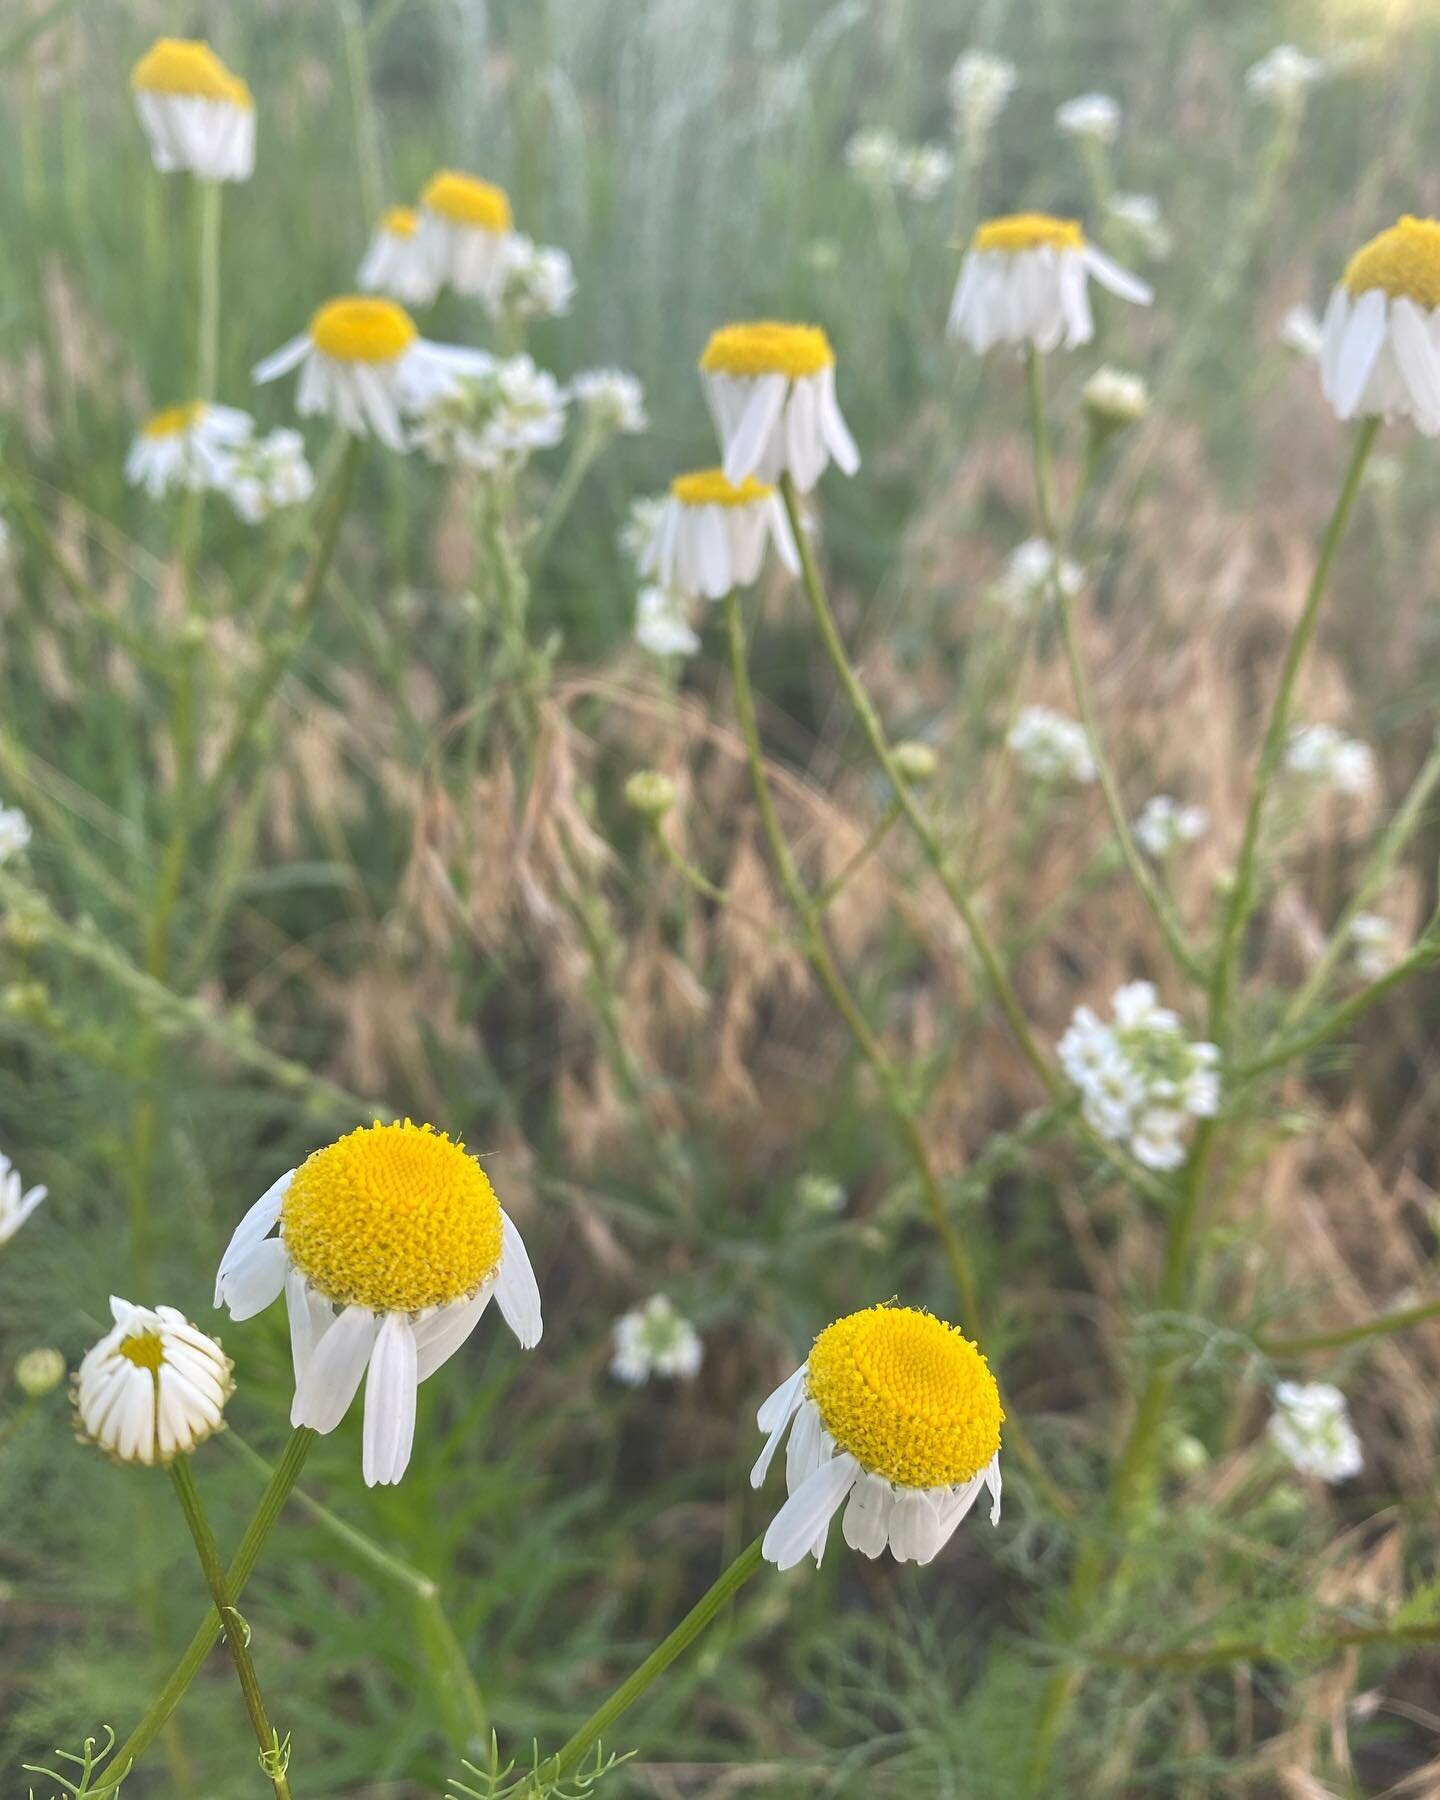 What a joy to see chamomile on the trail this morning! This sweet little flower has long been one of my favorites. It is so delicate, yet powerful, and brings such a sense of calm. We use it often in our custom tea blends and it&rsquo;s always a deli